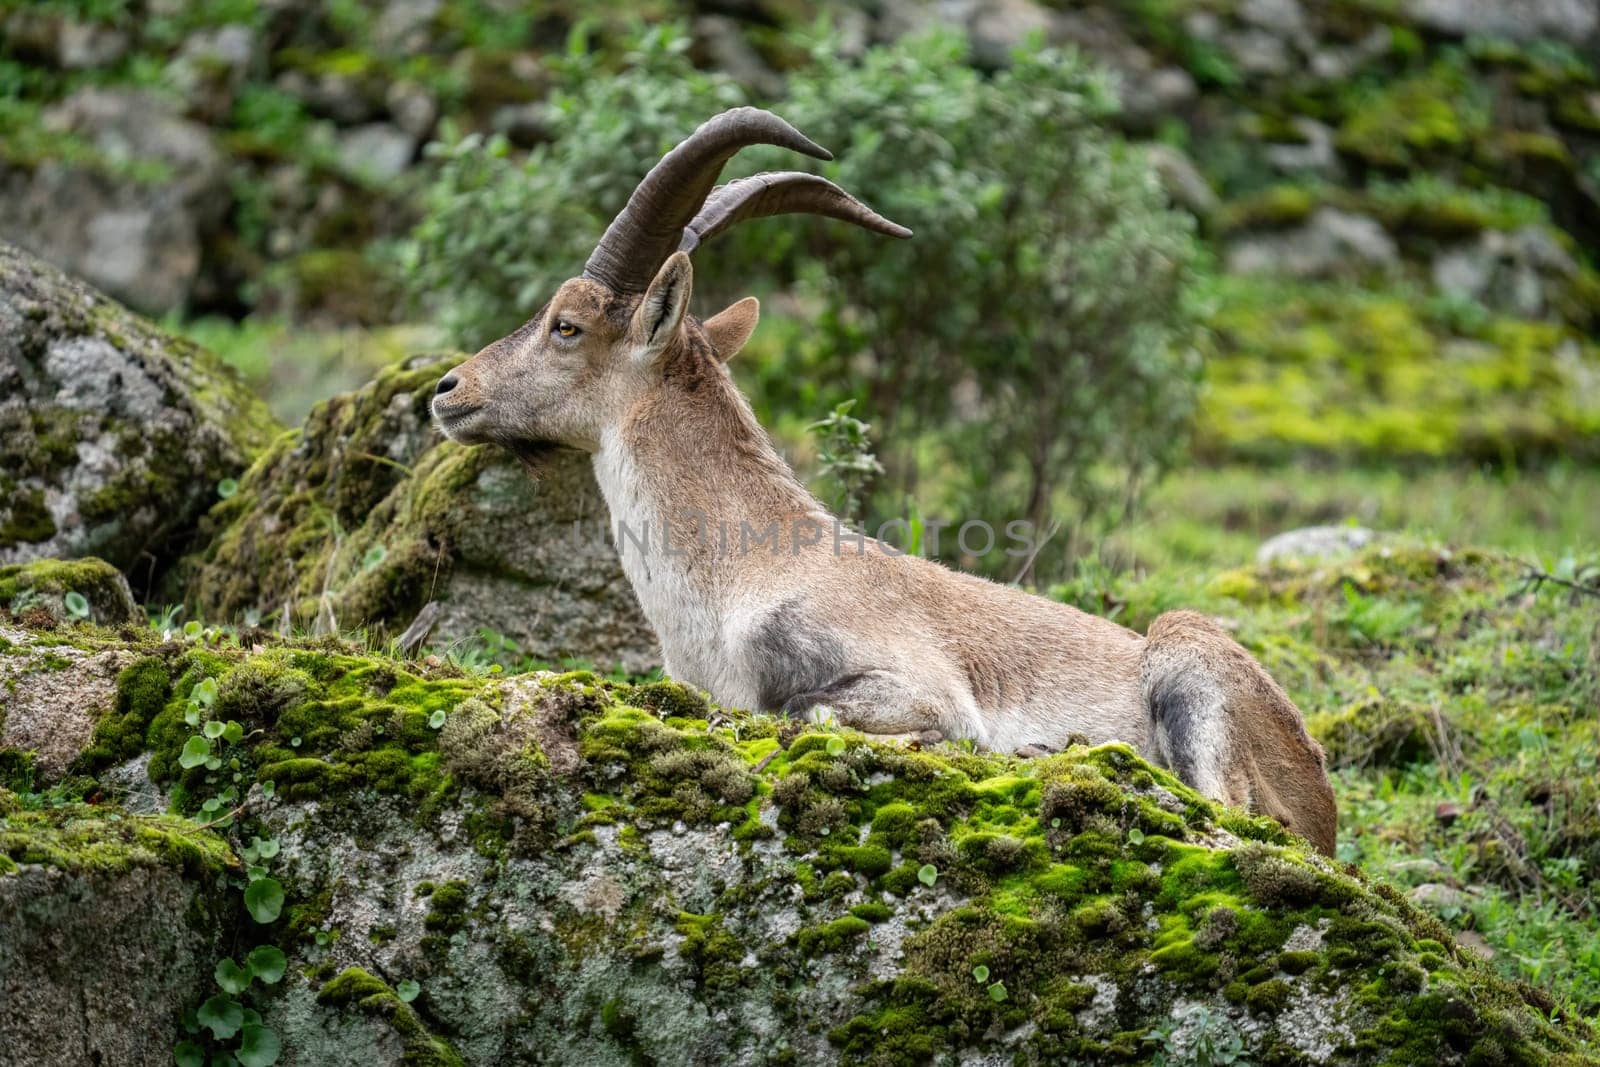 A mountain goat rests on a mossy rock, camouflaged with nature.